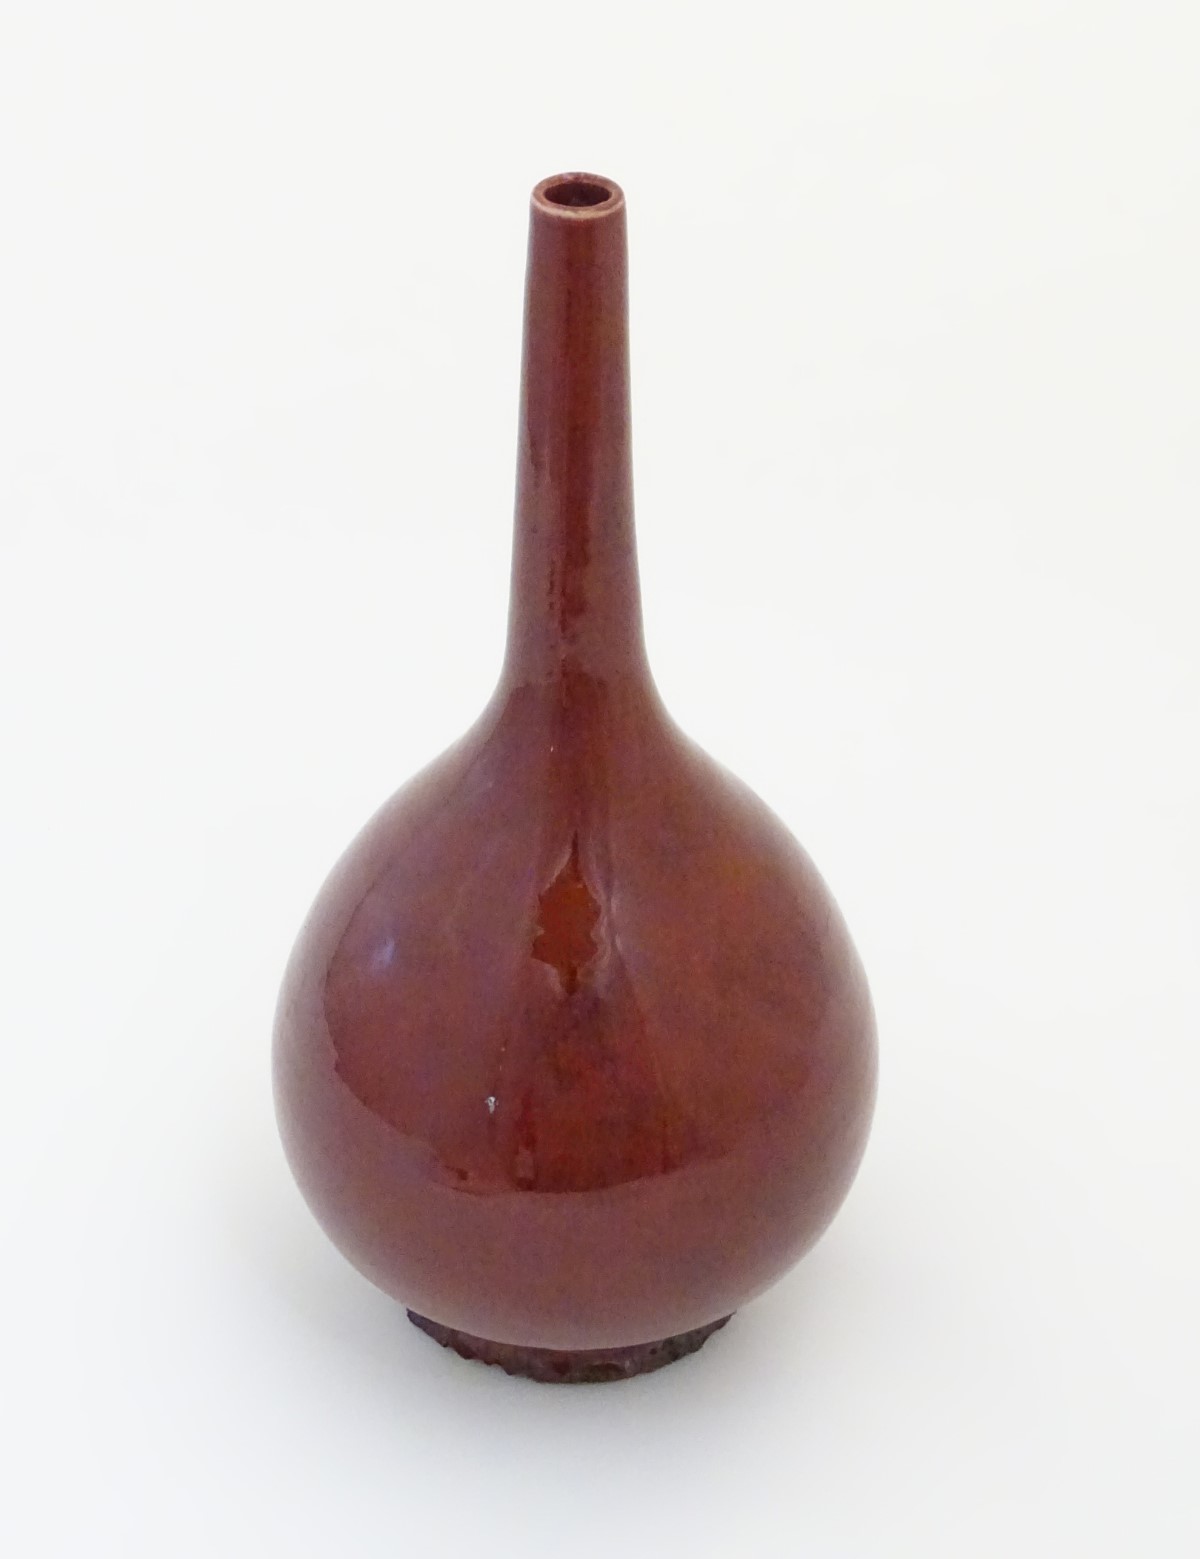 A Chinese pear-shaped vase with a slender, elongated neck with a sang de boeuf glaze. Approx.